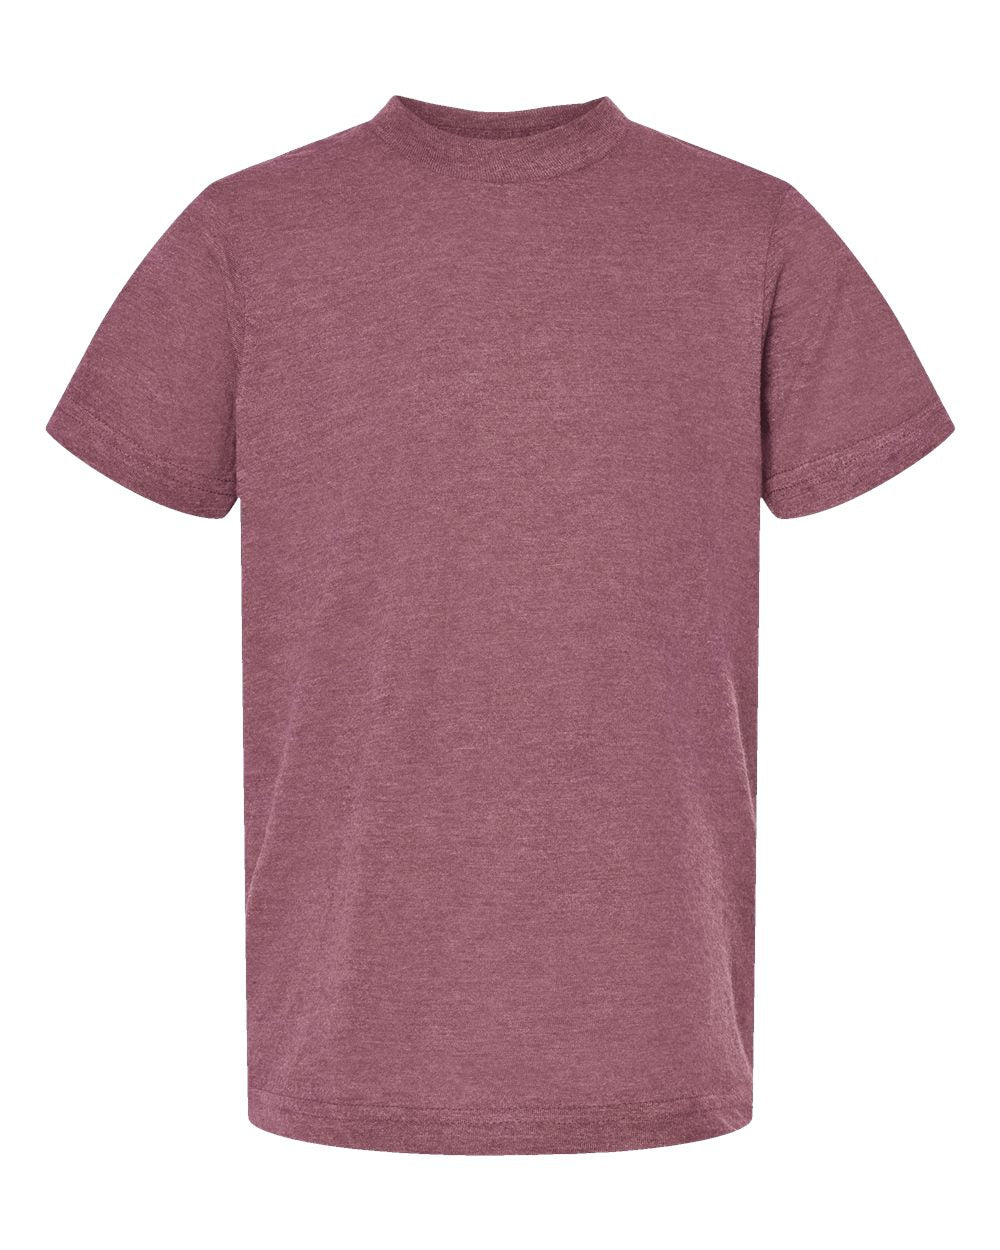 Tultex Youth Tee (235) in Heather Cassis